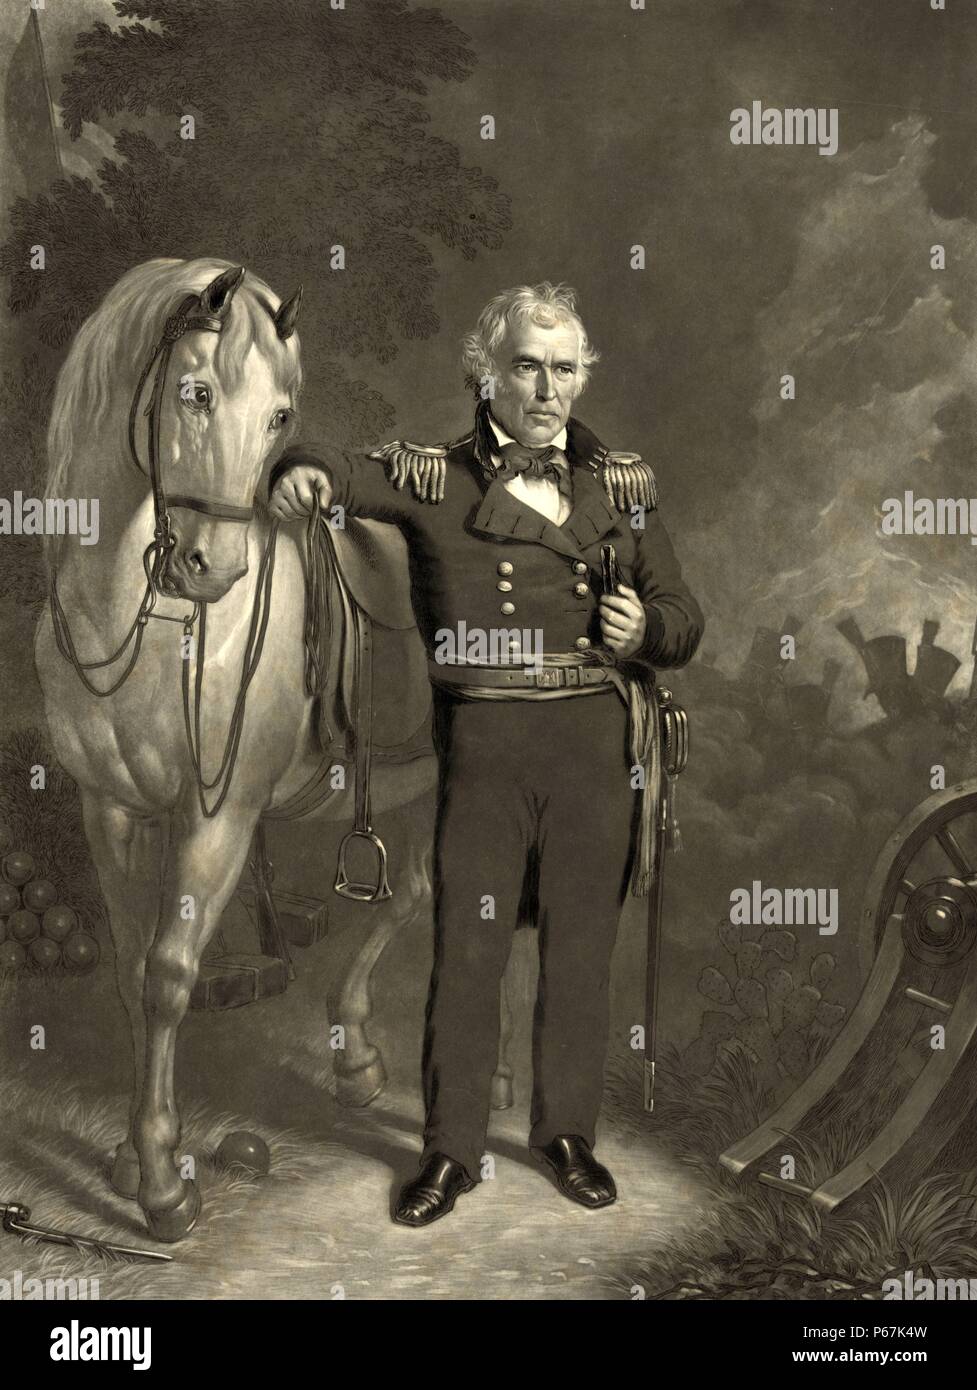 President Zachary Taylor. Taylor was the 12th President of the United States. Before his presidency, Taylor was a career officer in the United States Army, rising to the rank of major general. Stock Photo